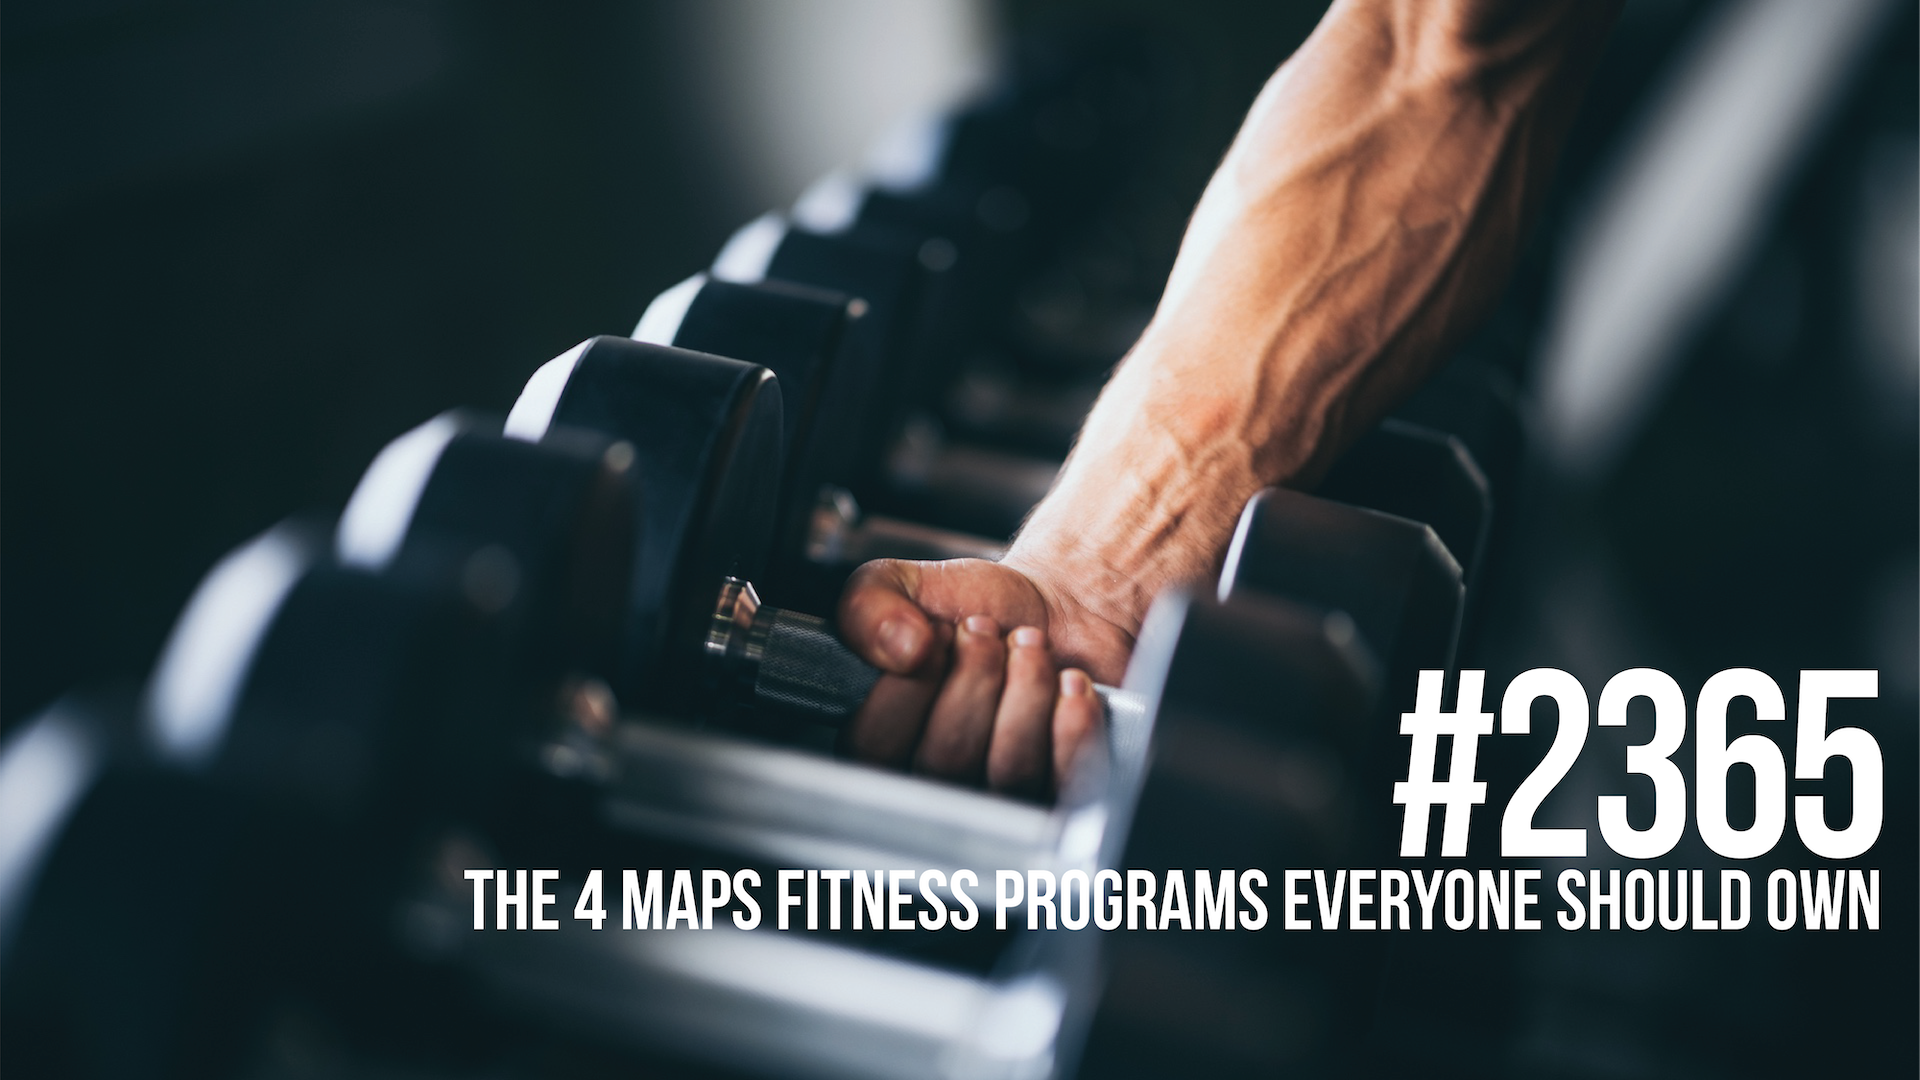 2365: The 4 Maps Fitness Programs Everyone Should Own